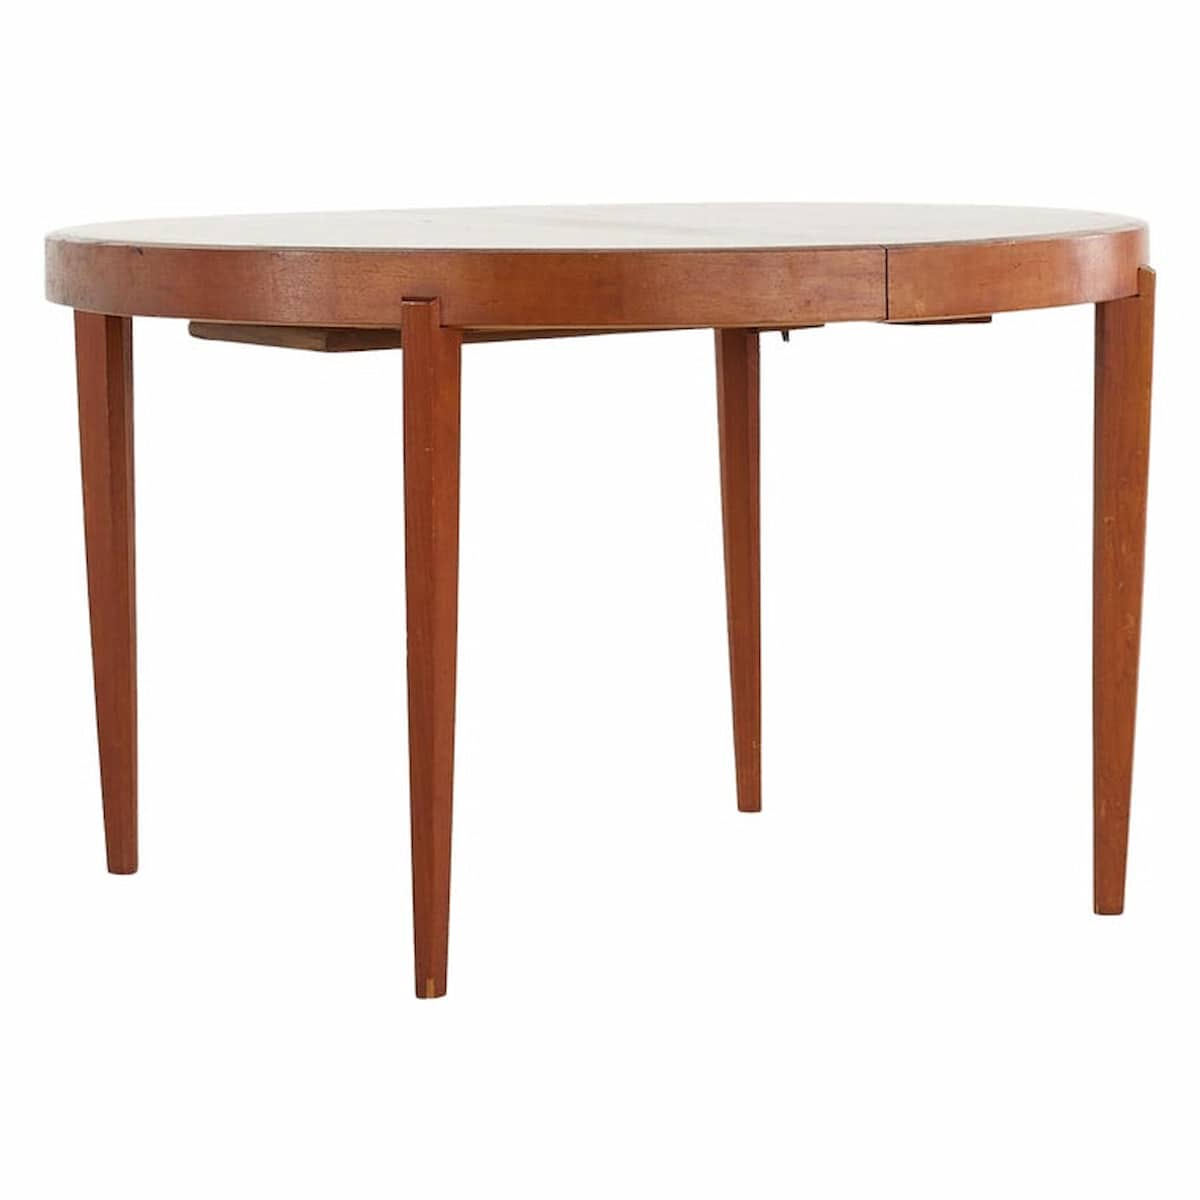 Johannes Andersen Style Mid Century Teak Expanding Dining Table with 4 Leaves